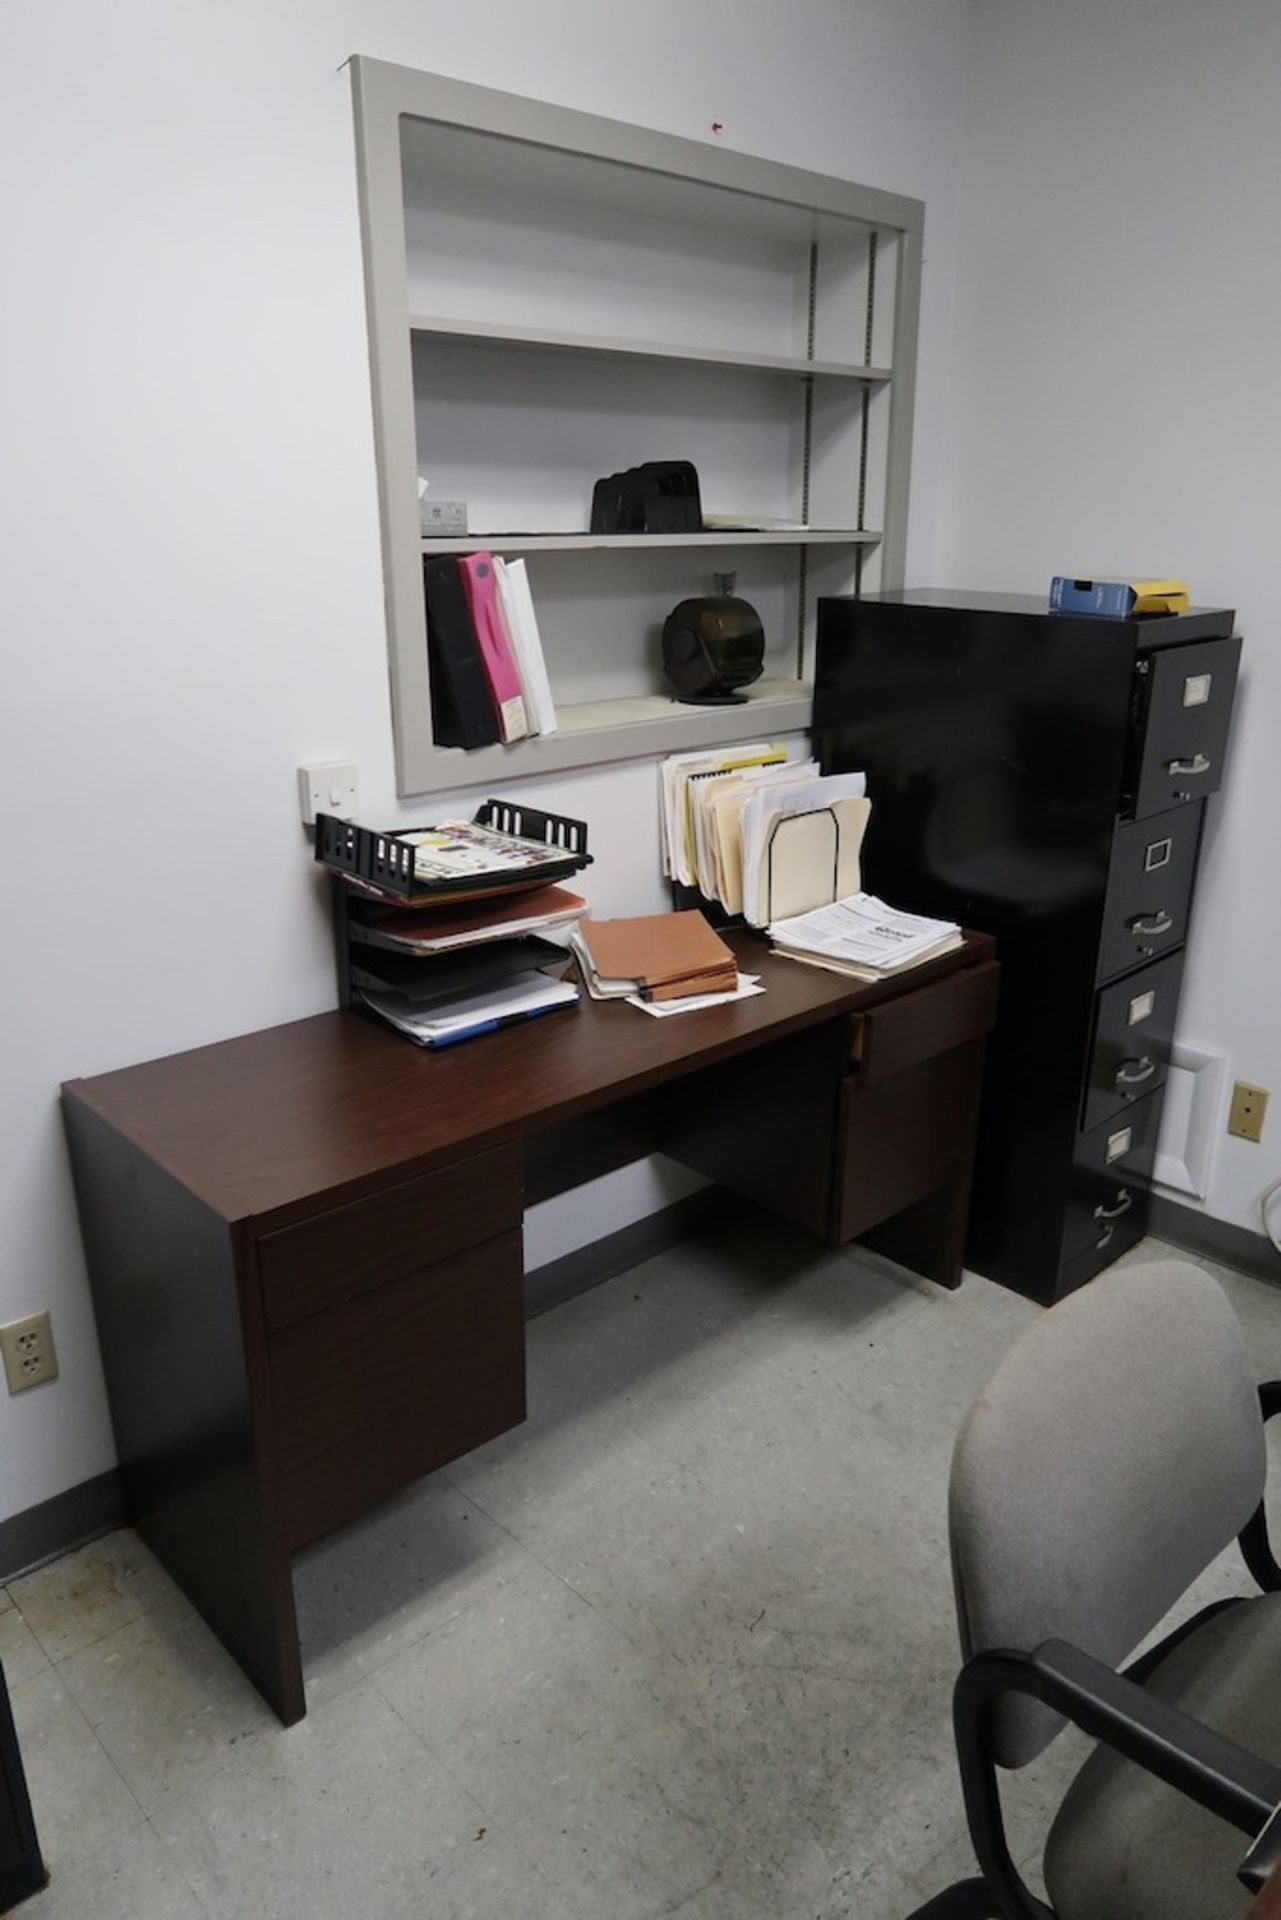 Warehouse Office Furniture - Image 4 of 10